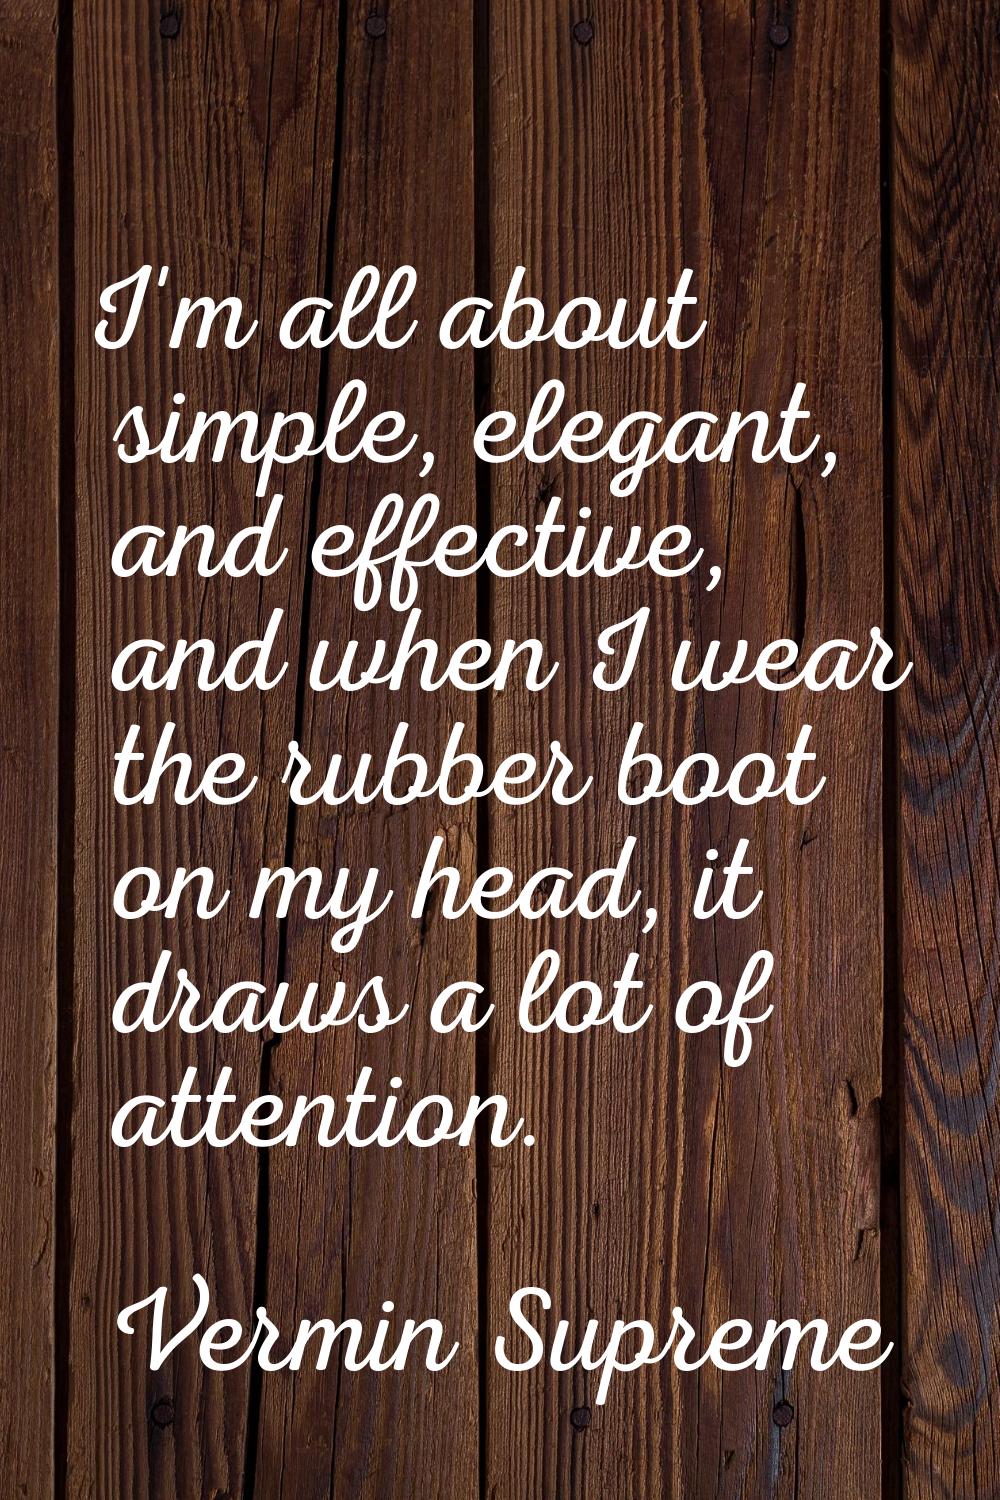 I'm all about simple, elegant, and effective, and when I wear the rubber boot on my head, it draws 